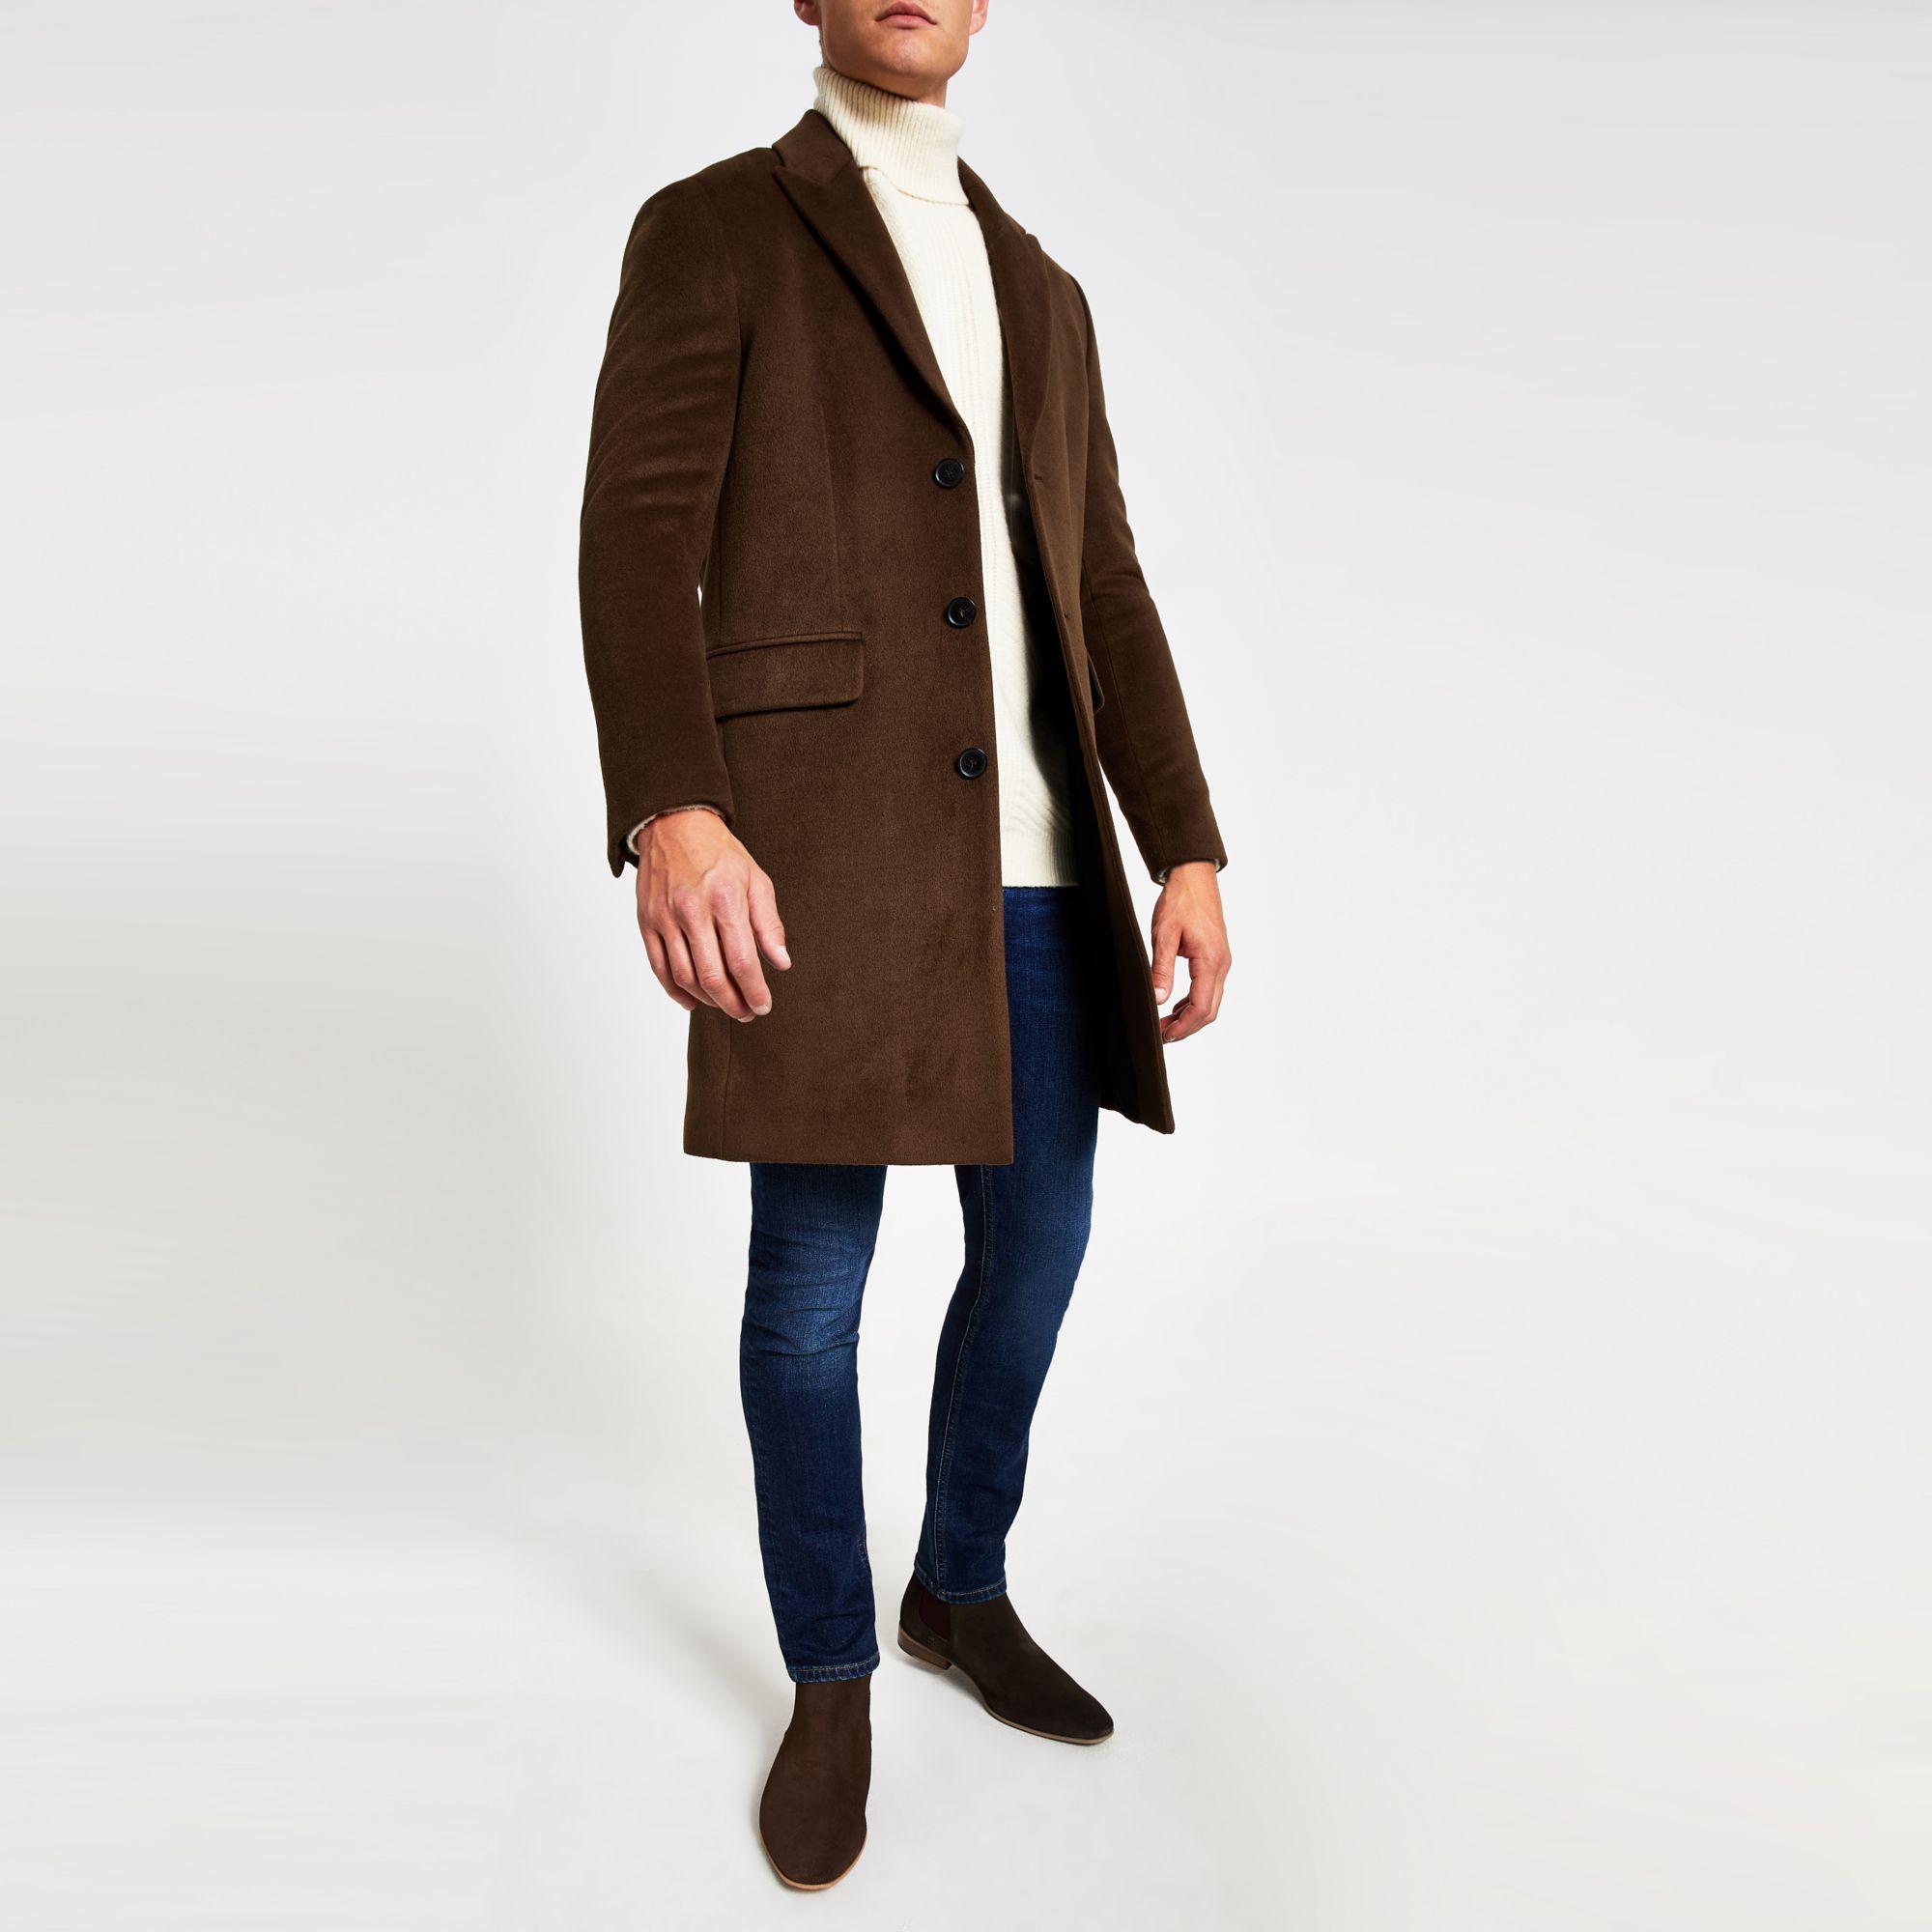 River Island Synthetic Dark Brown Single Breasted Overcoat for Men - Lyst